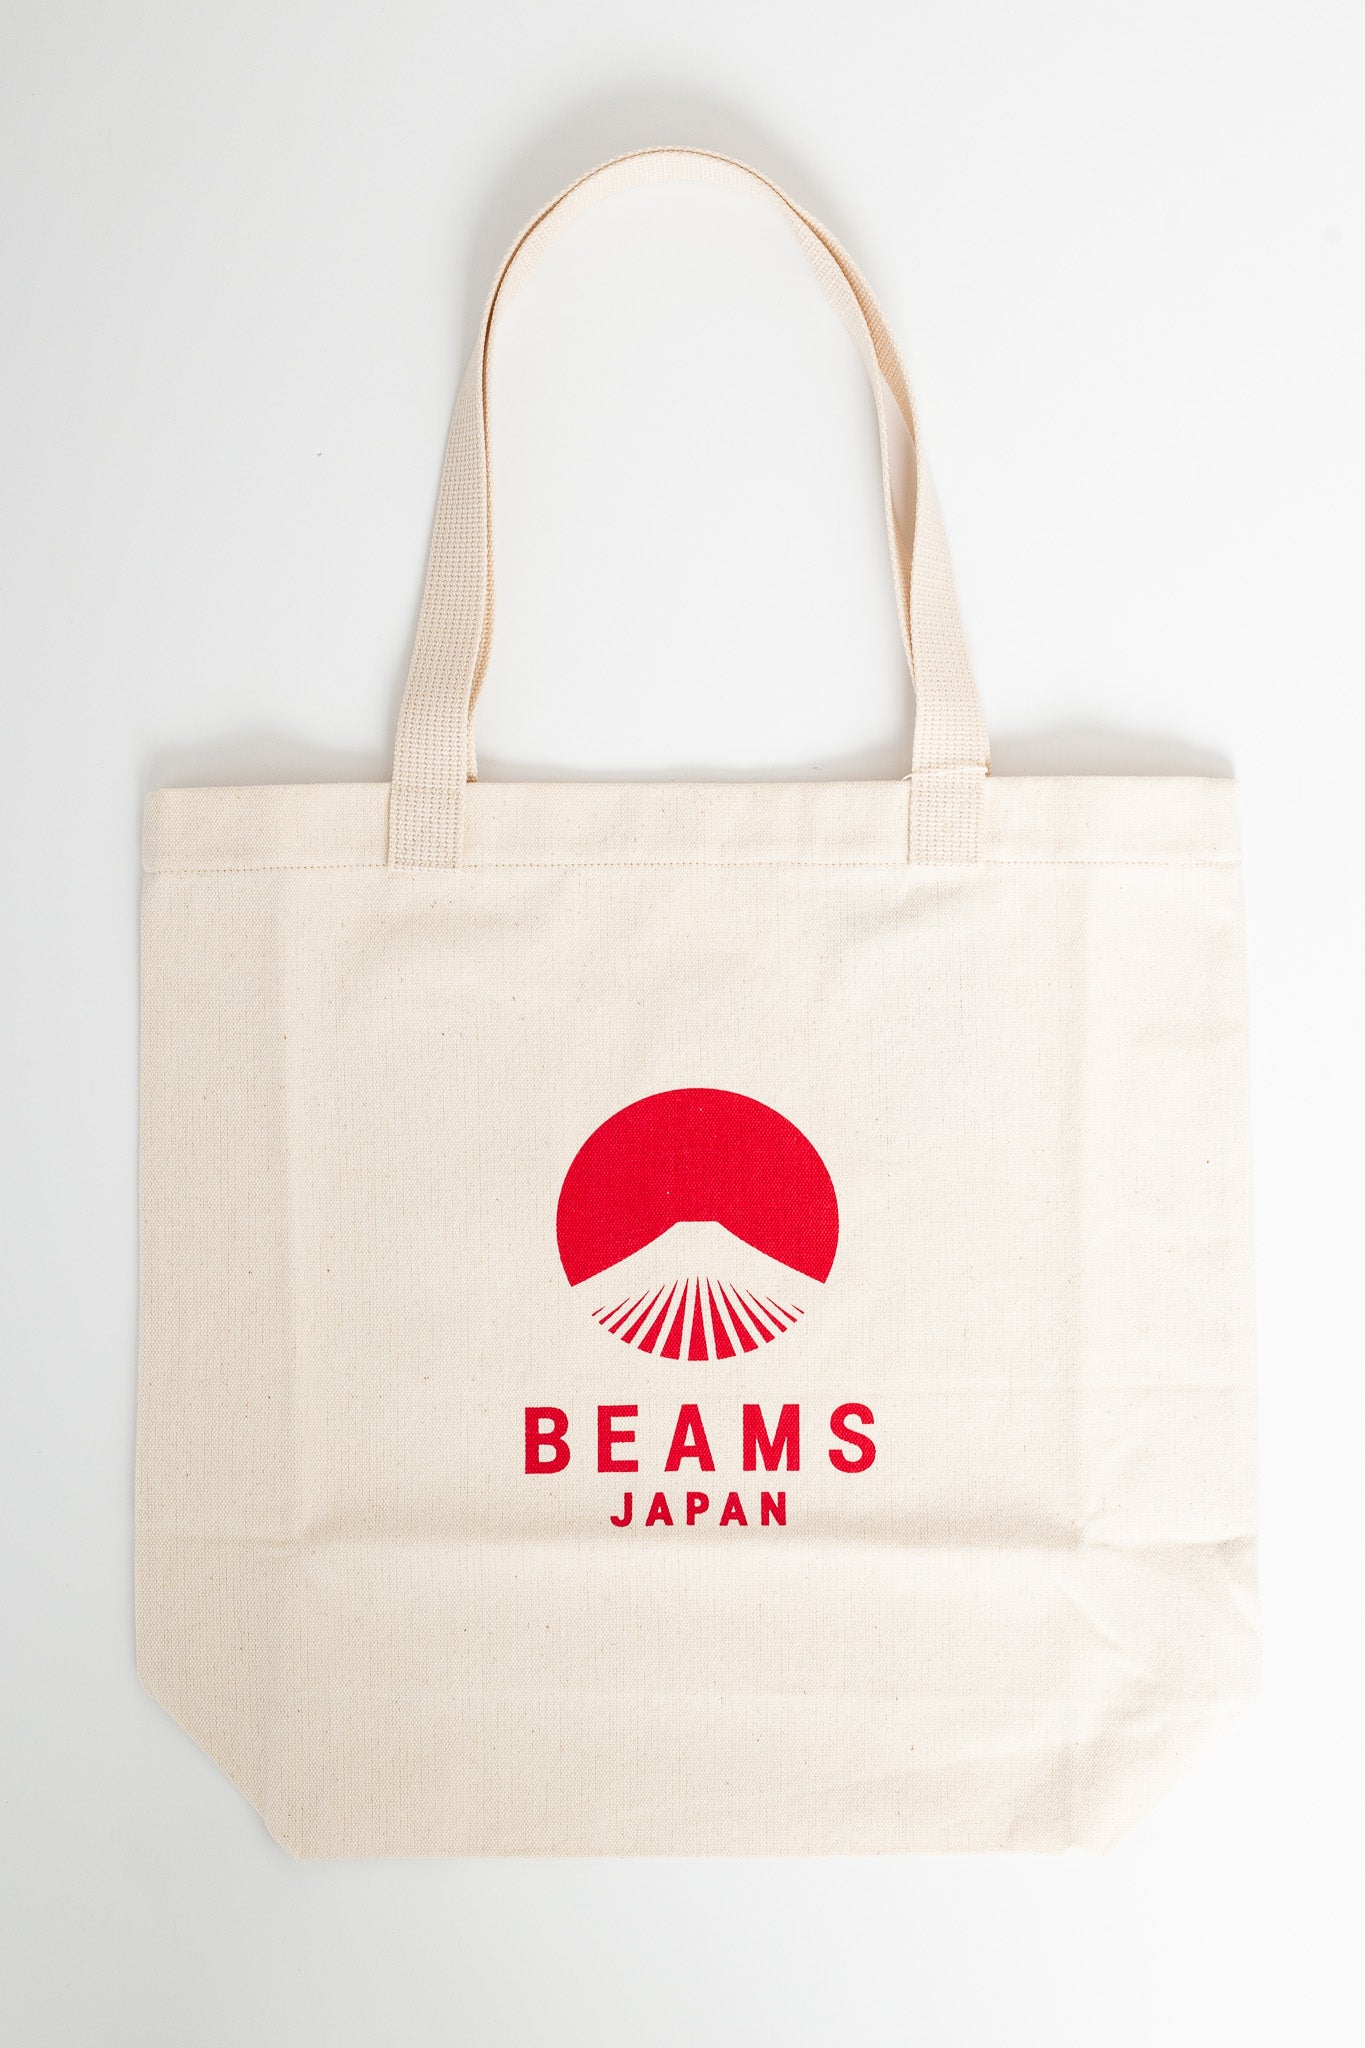 evergreen works x BEAMS JAPAN Tote Bag - White x Red